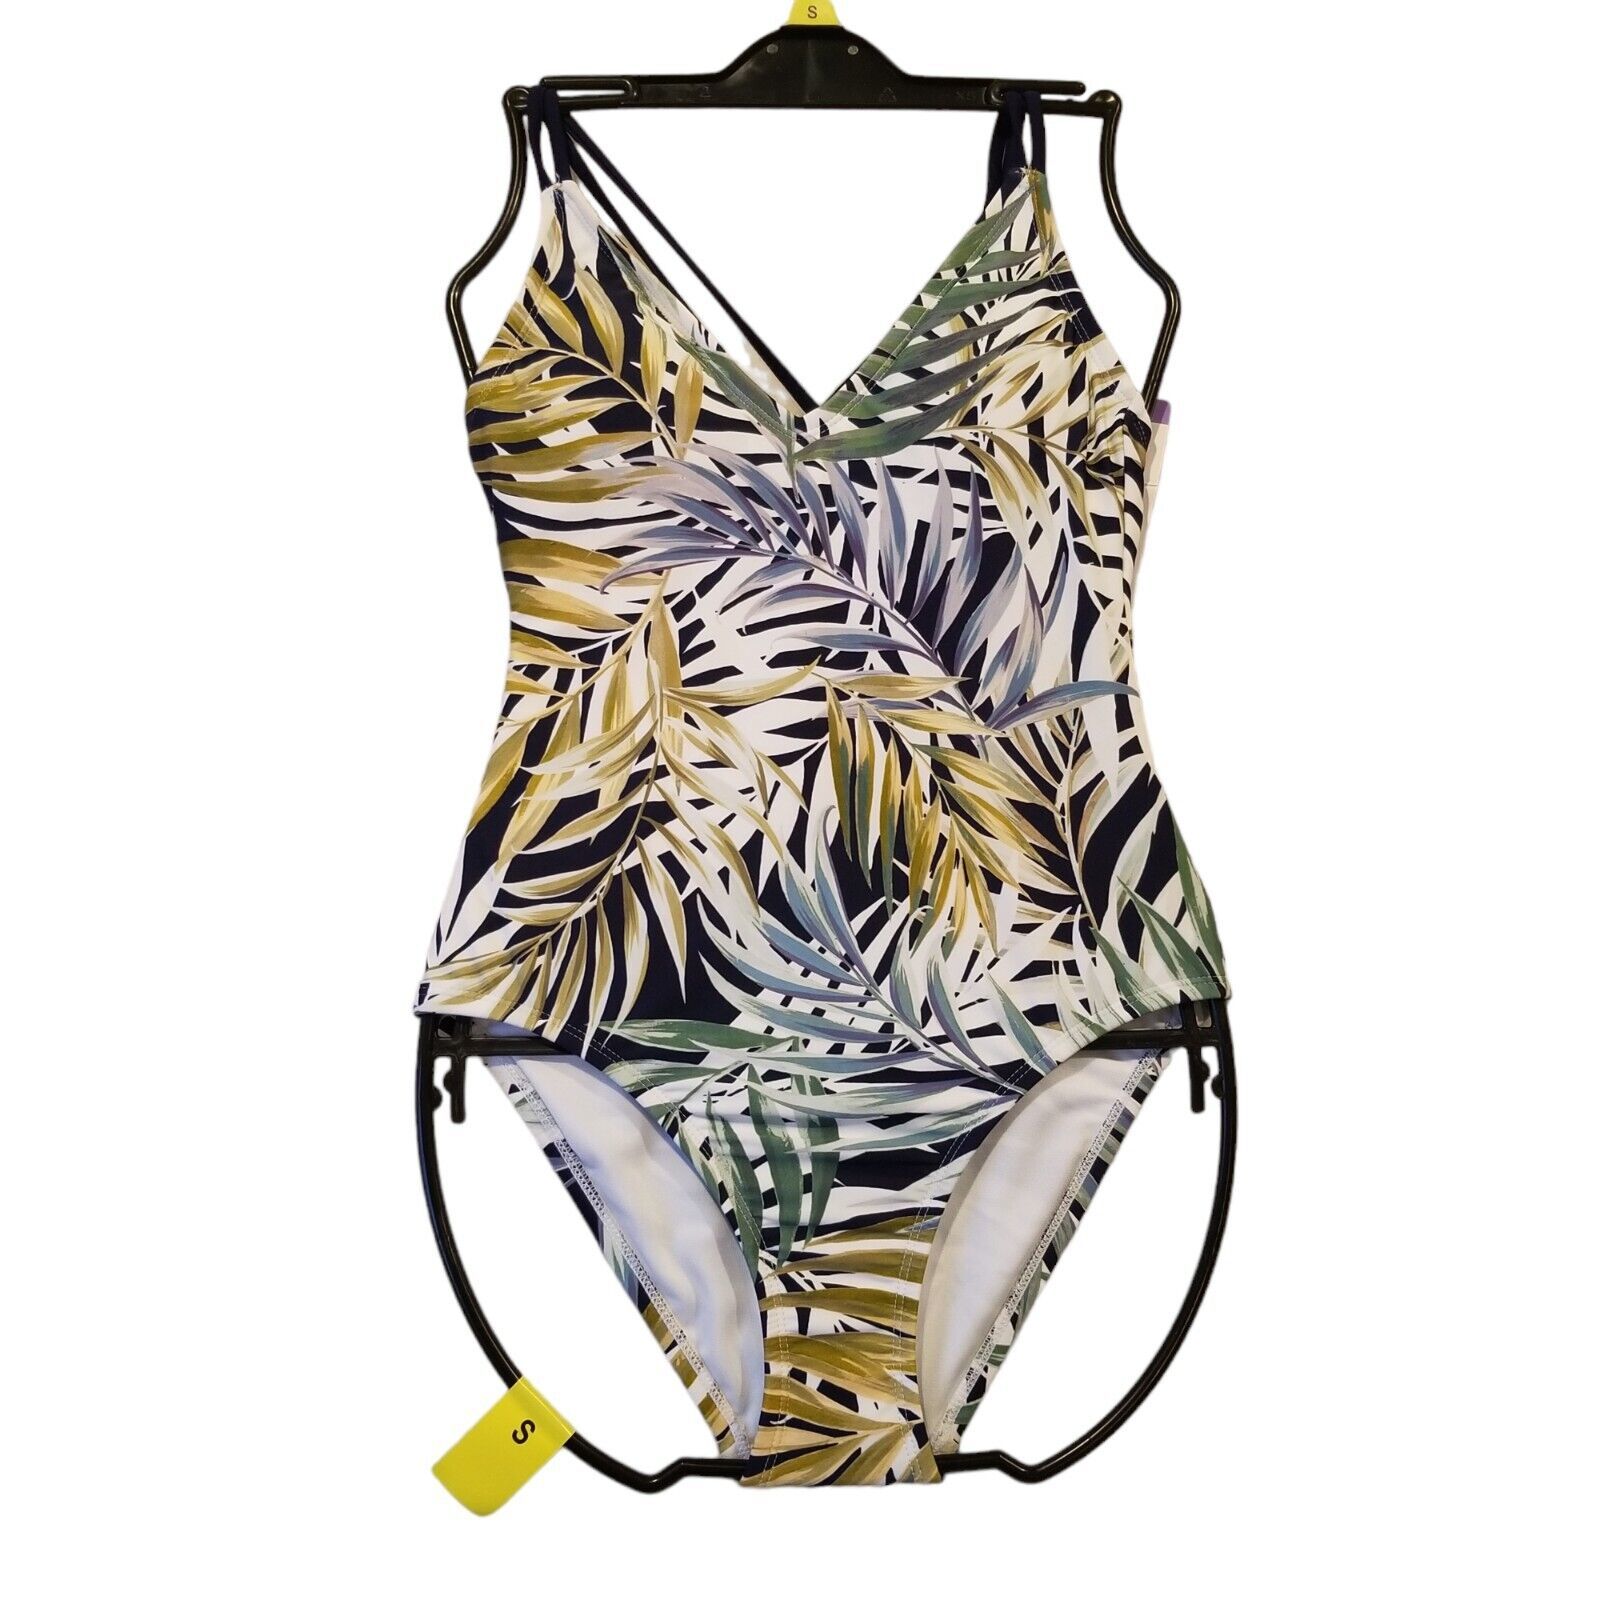 Primary image for Hurley Womens 1-Piece Bathing Suit Small Tropical Print Adjustable Straps NEW